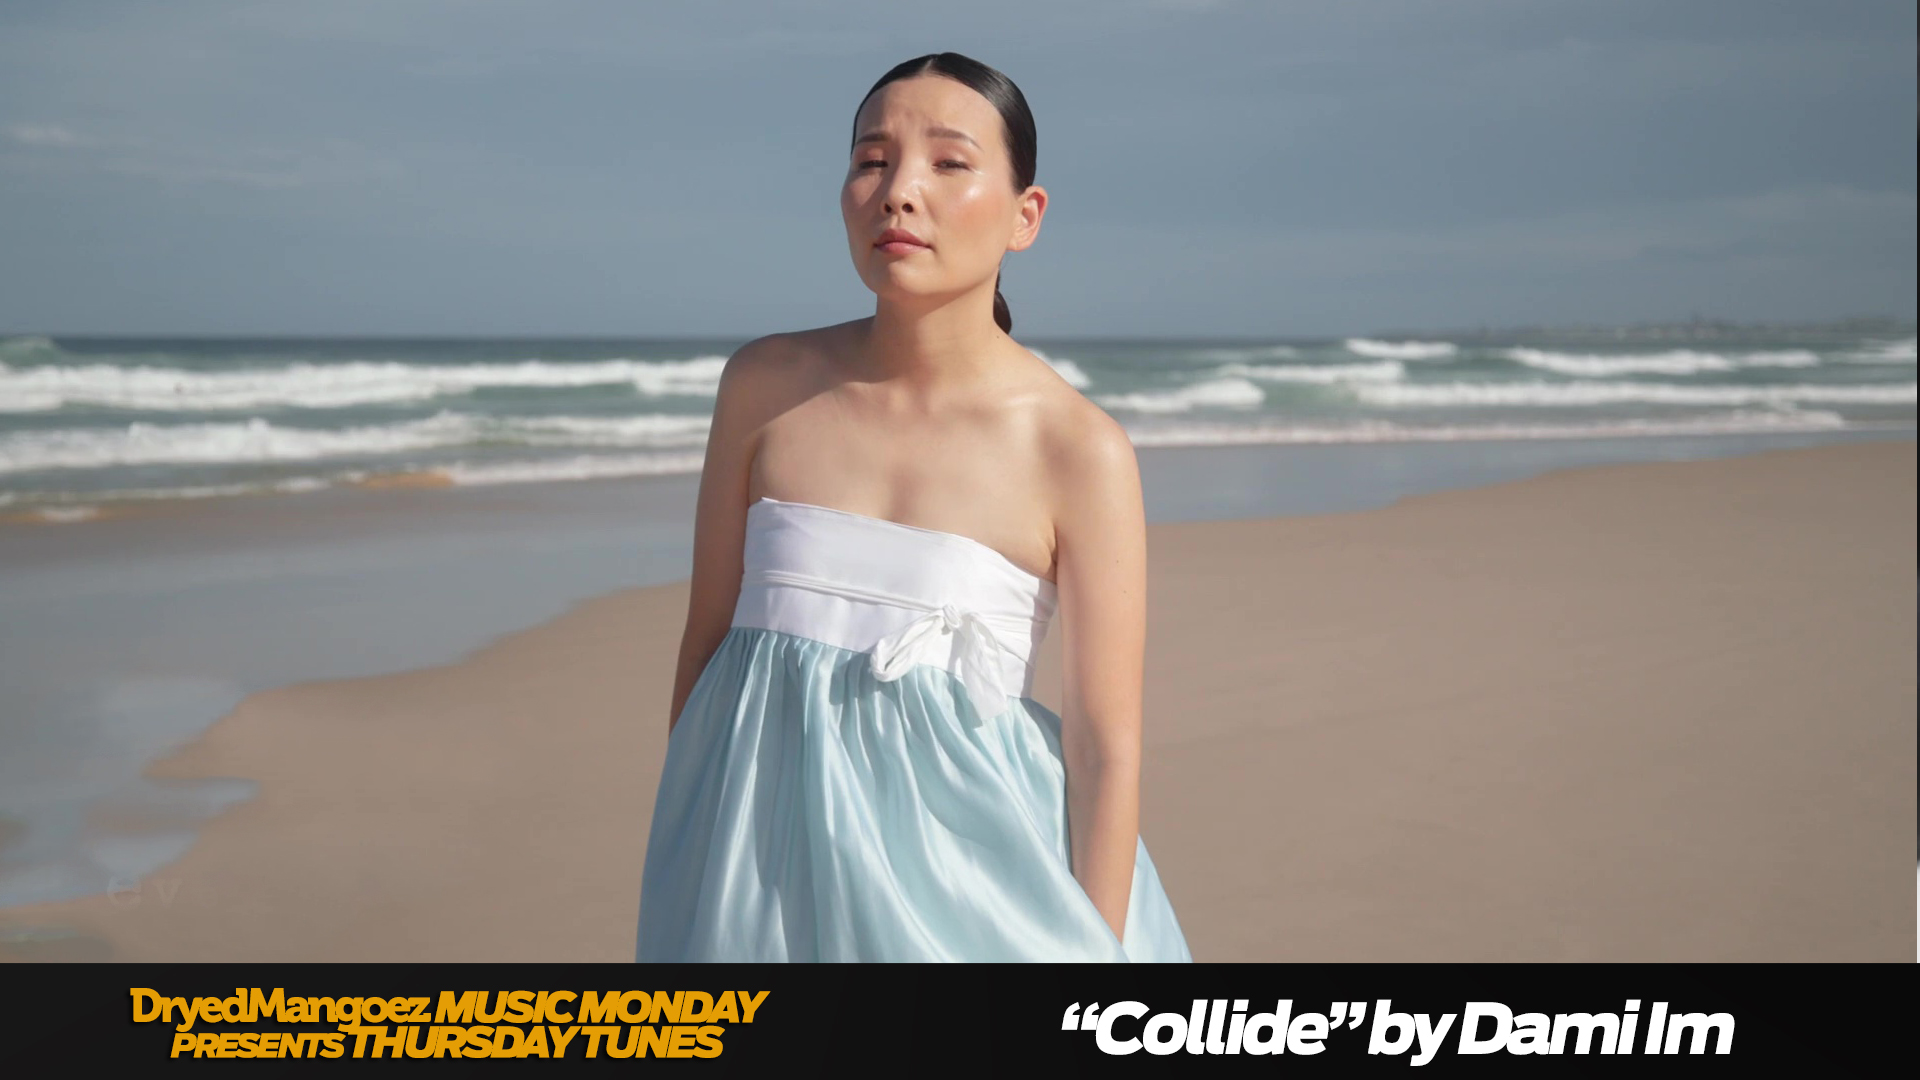 Thursday Tunes, March 30, 2023 – “Collide” by Dami Im